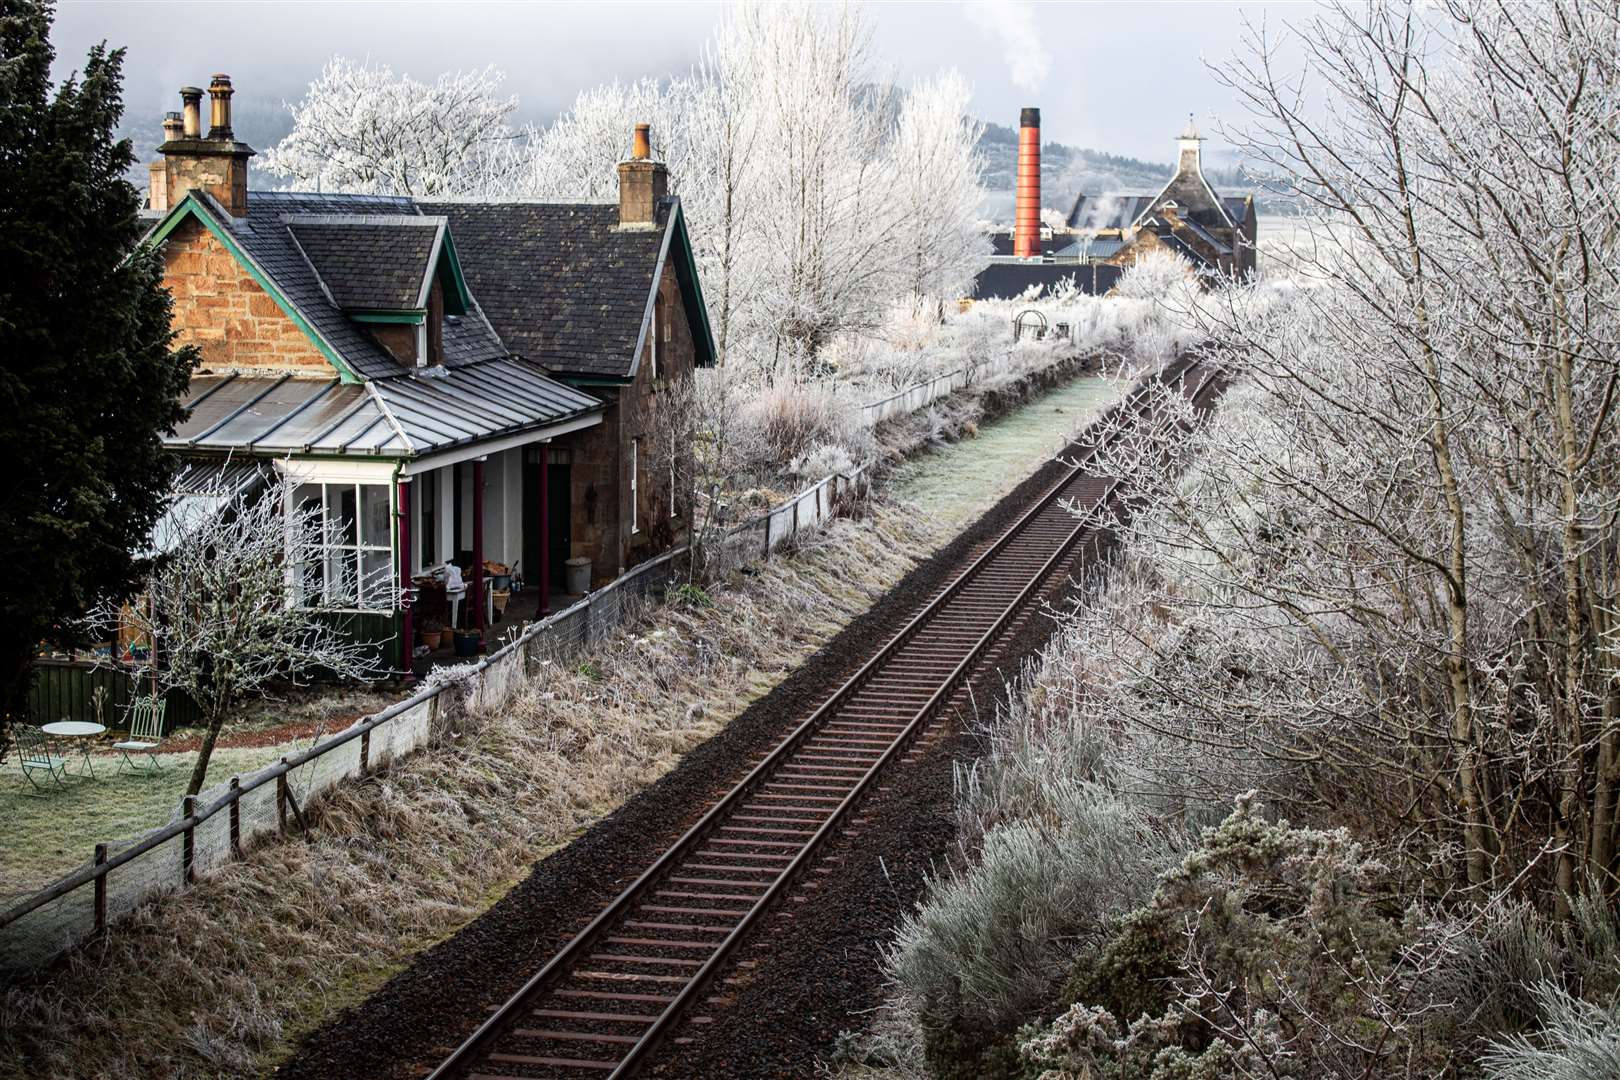 The rail line is still in use next to Edderton, but the former station house is now privately owned. Photo: Niall Harkiss